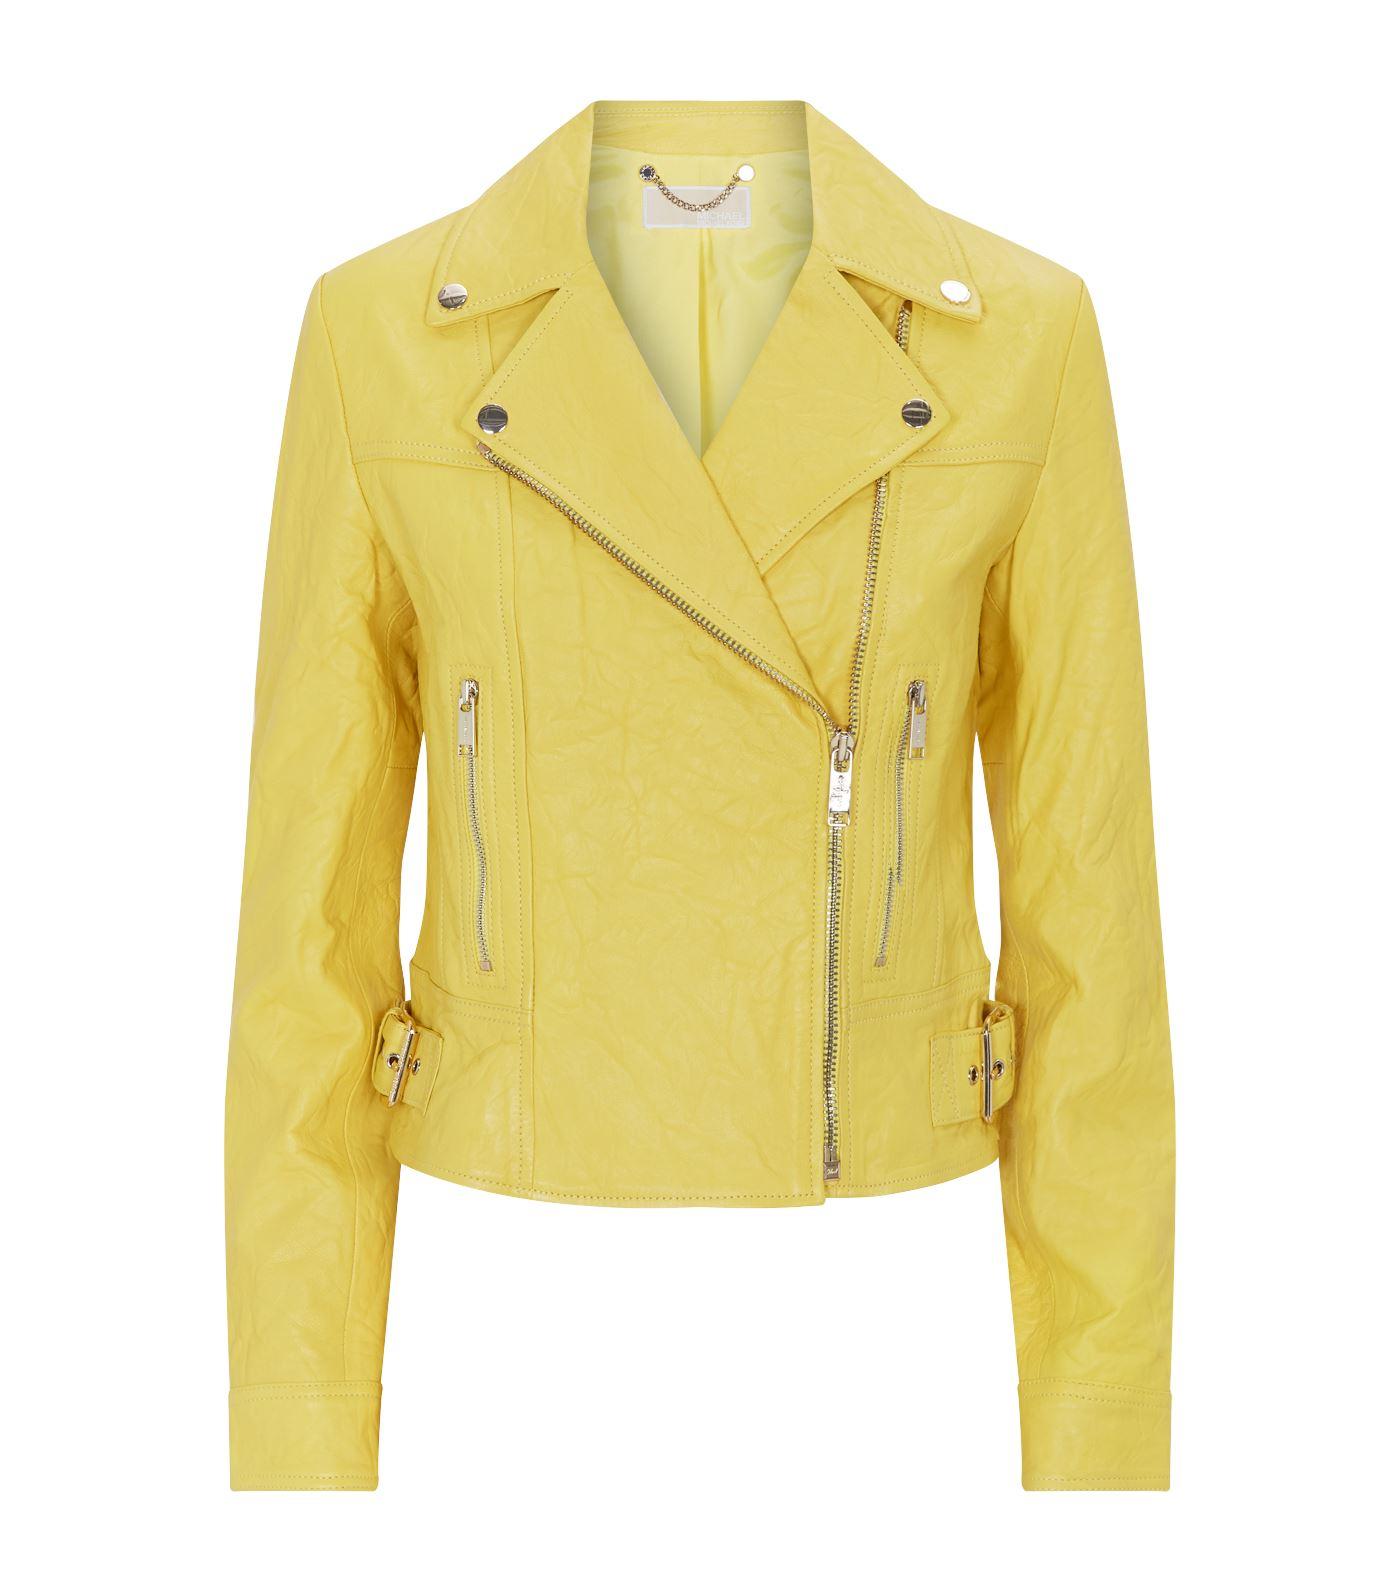 MICHAEL Michael Kors Leather Jacket in Yellow - Lyst